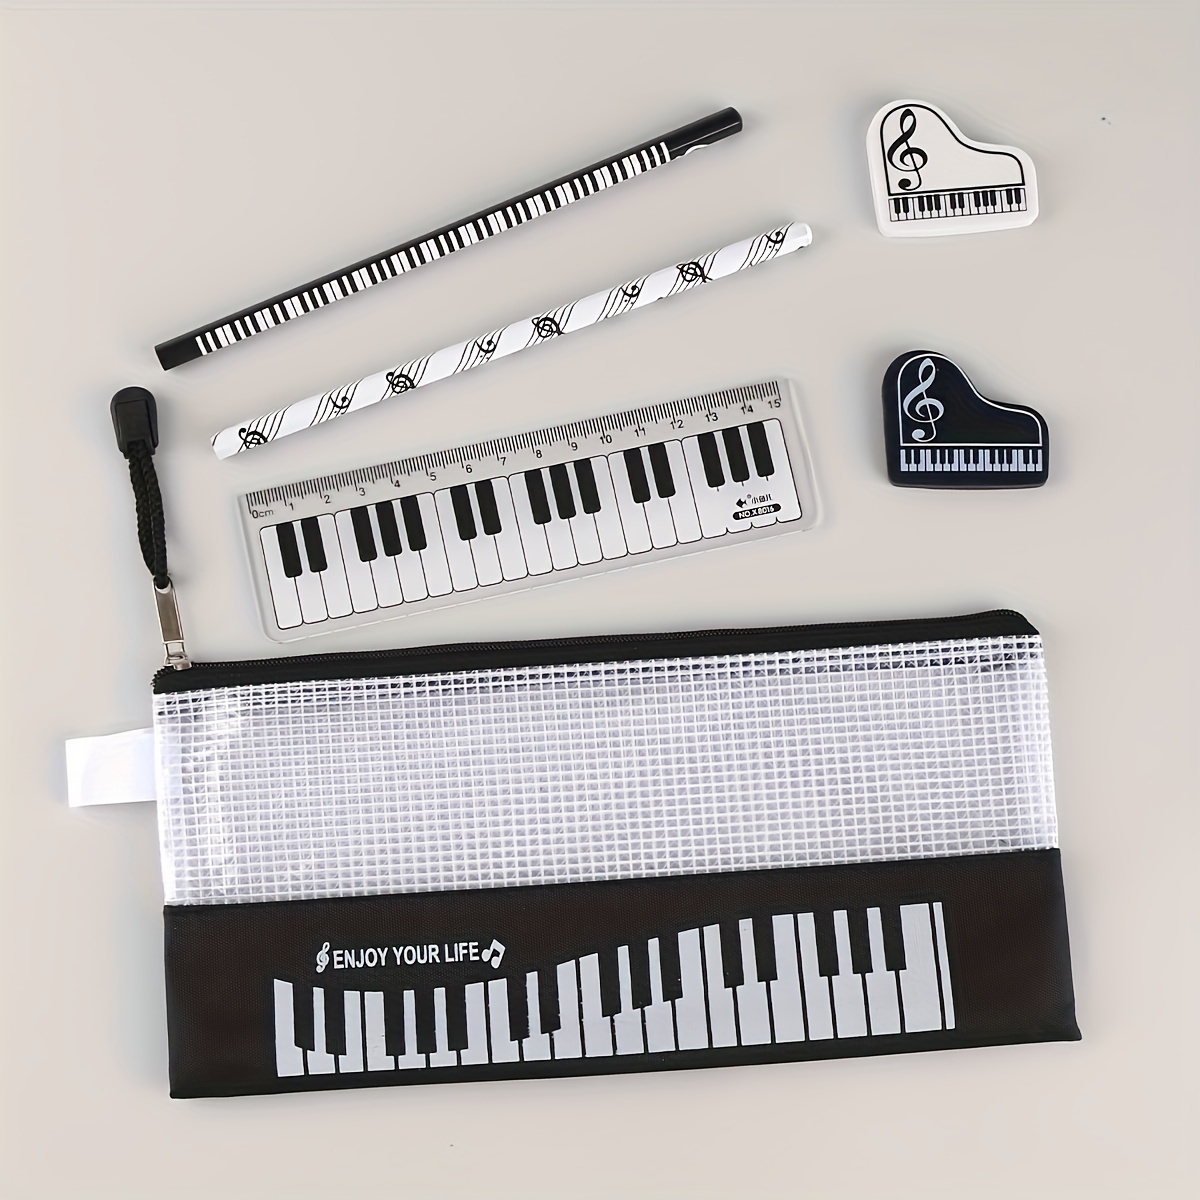 

6pcs/box, Piano Keys Style Stationery Set Pencil Pouch Student Gifts Cartoon Stationery Supplies, Back To School, School Supplies, Kawaii Stationery, Colors For School, Stationery, Writing Pens